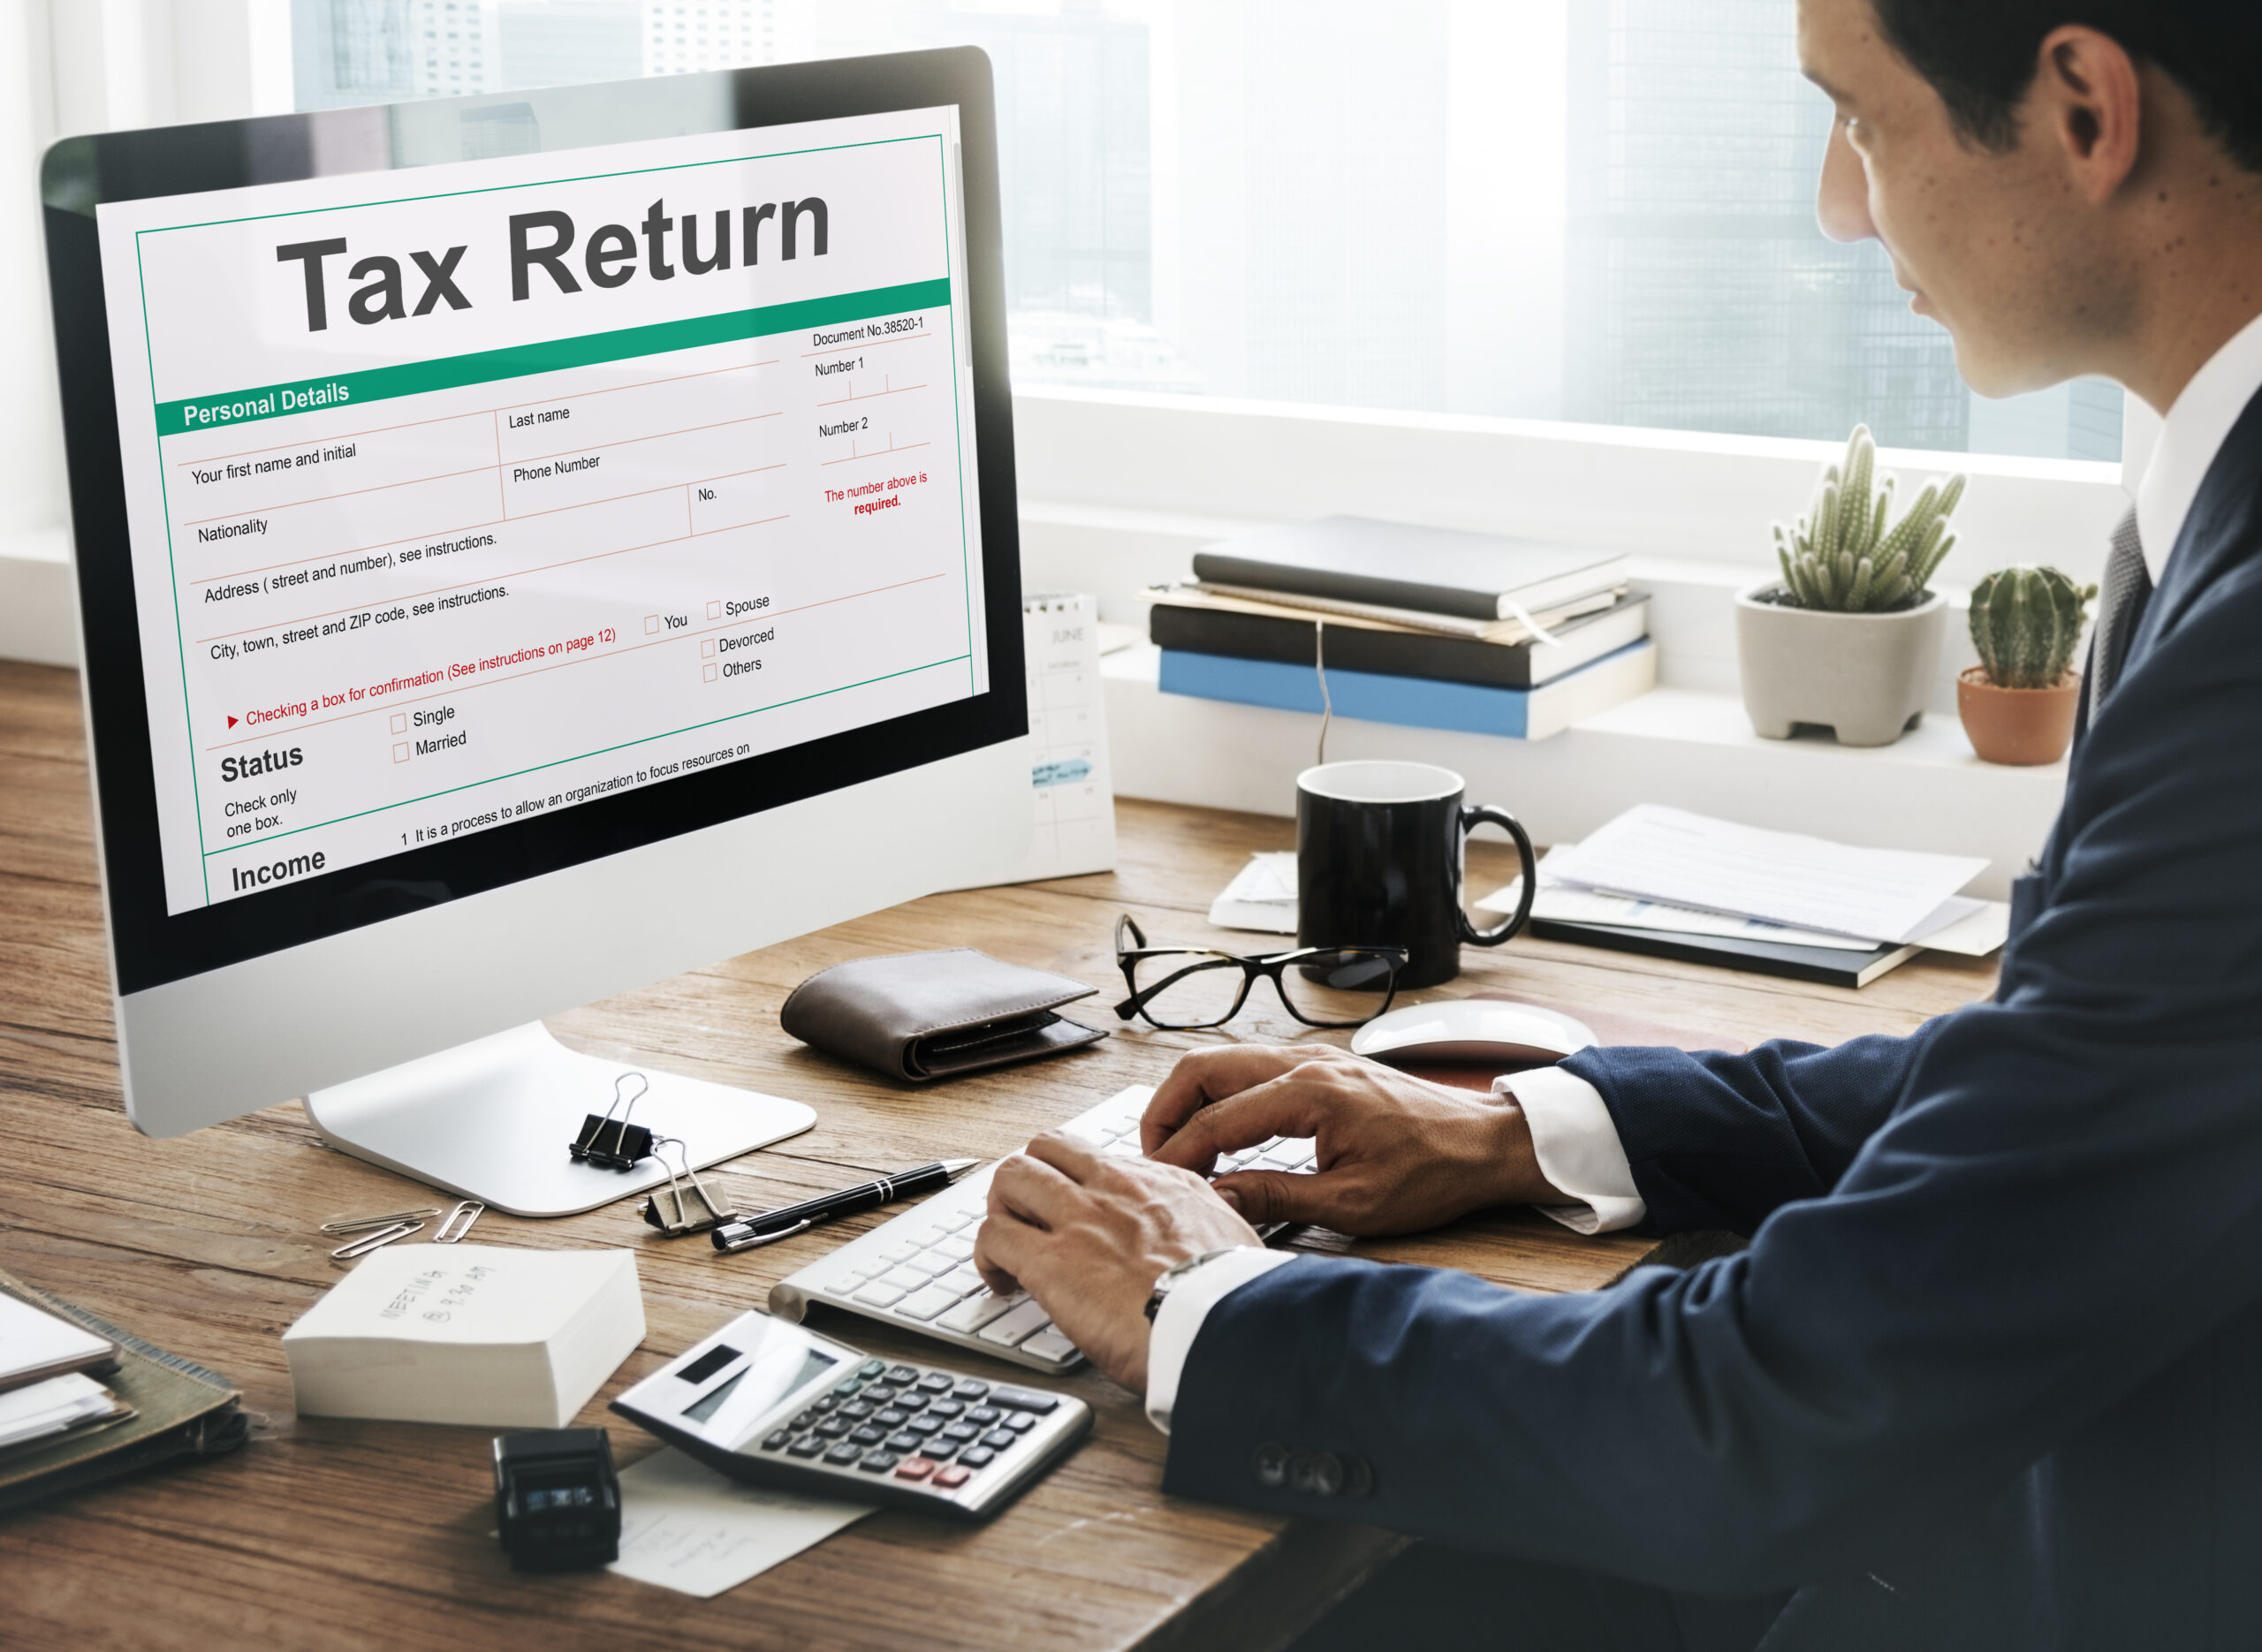 outsource tax preparation services outsourcing tax return preparation to india tax outsourcing services | Image by Freepik